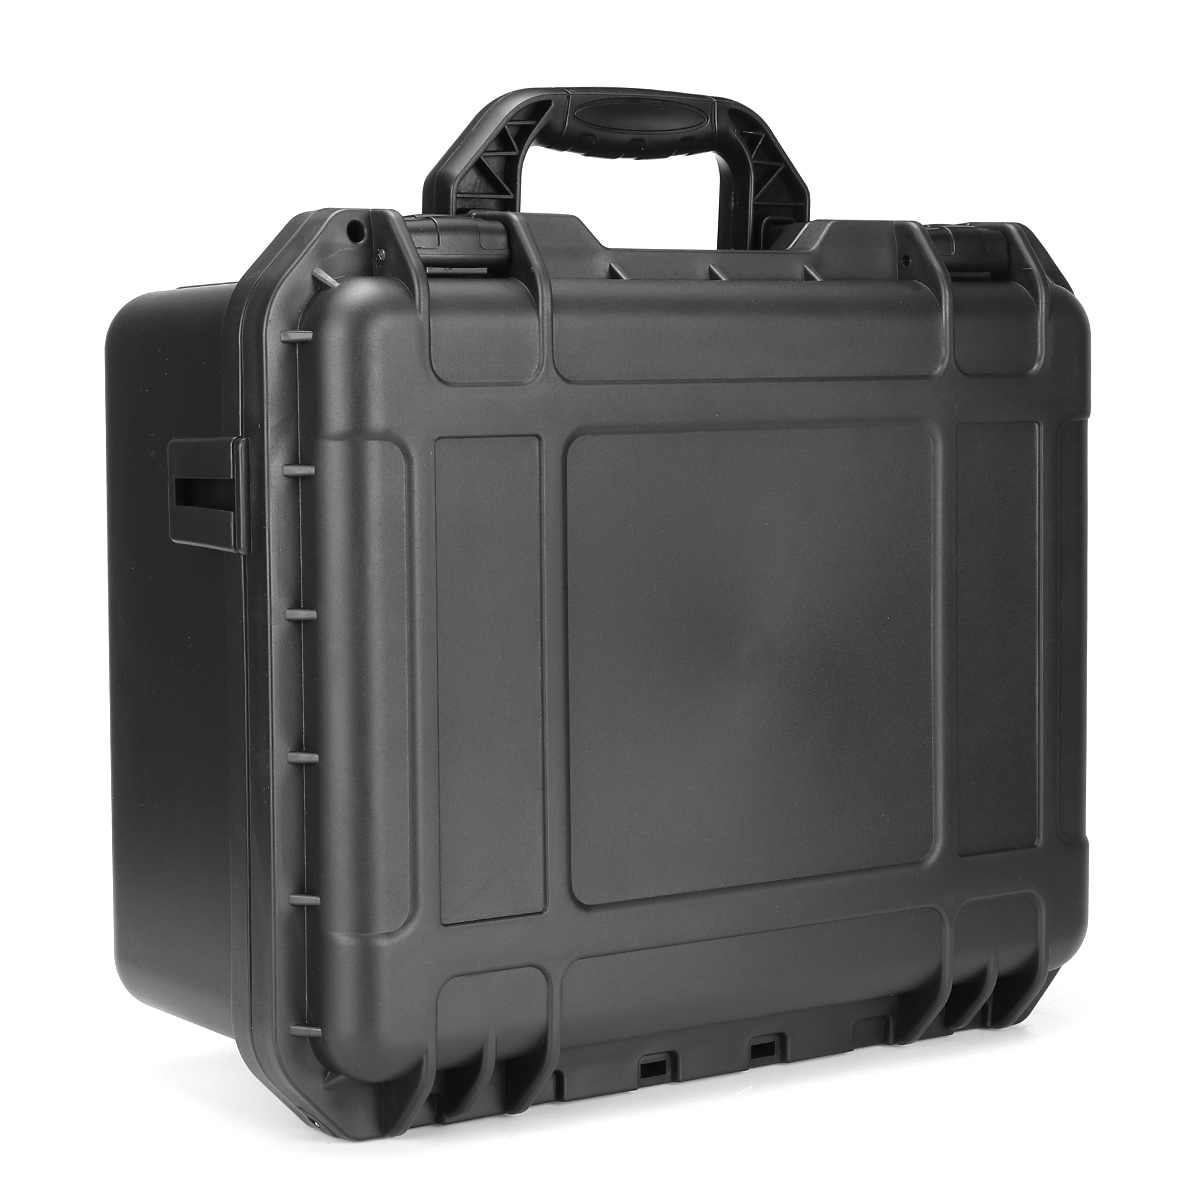 1PC-Shockproof-Sealed-Safety-Case-Toolbox-Airtight-Waterproof-Tool-Box-Instrument-Case-Dry-Box-with--1915433-10